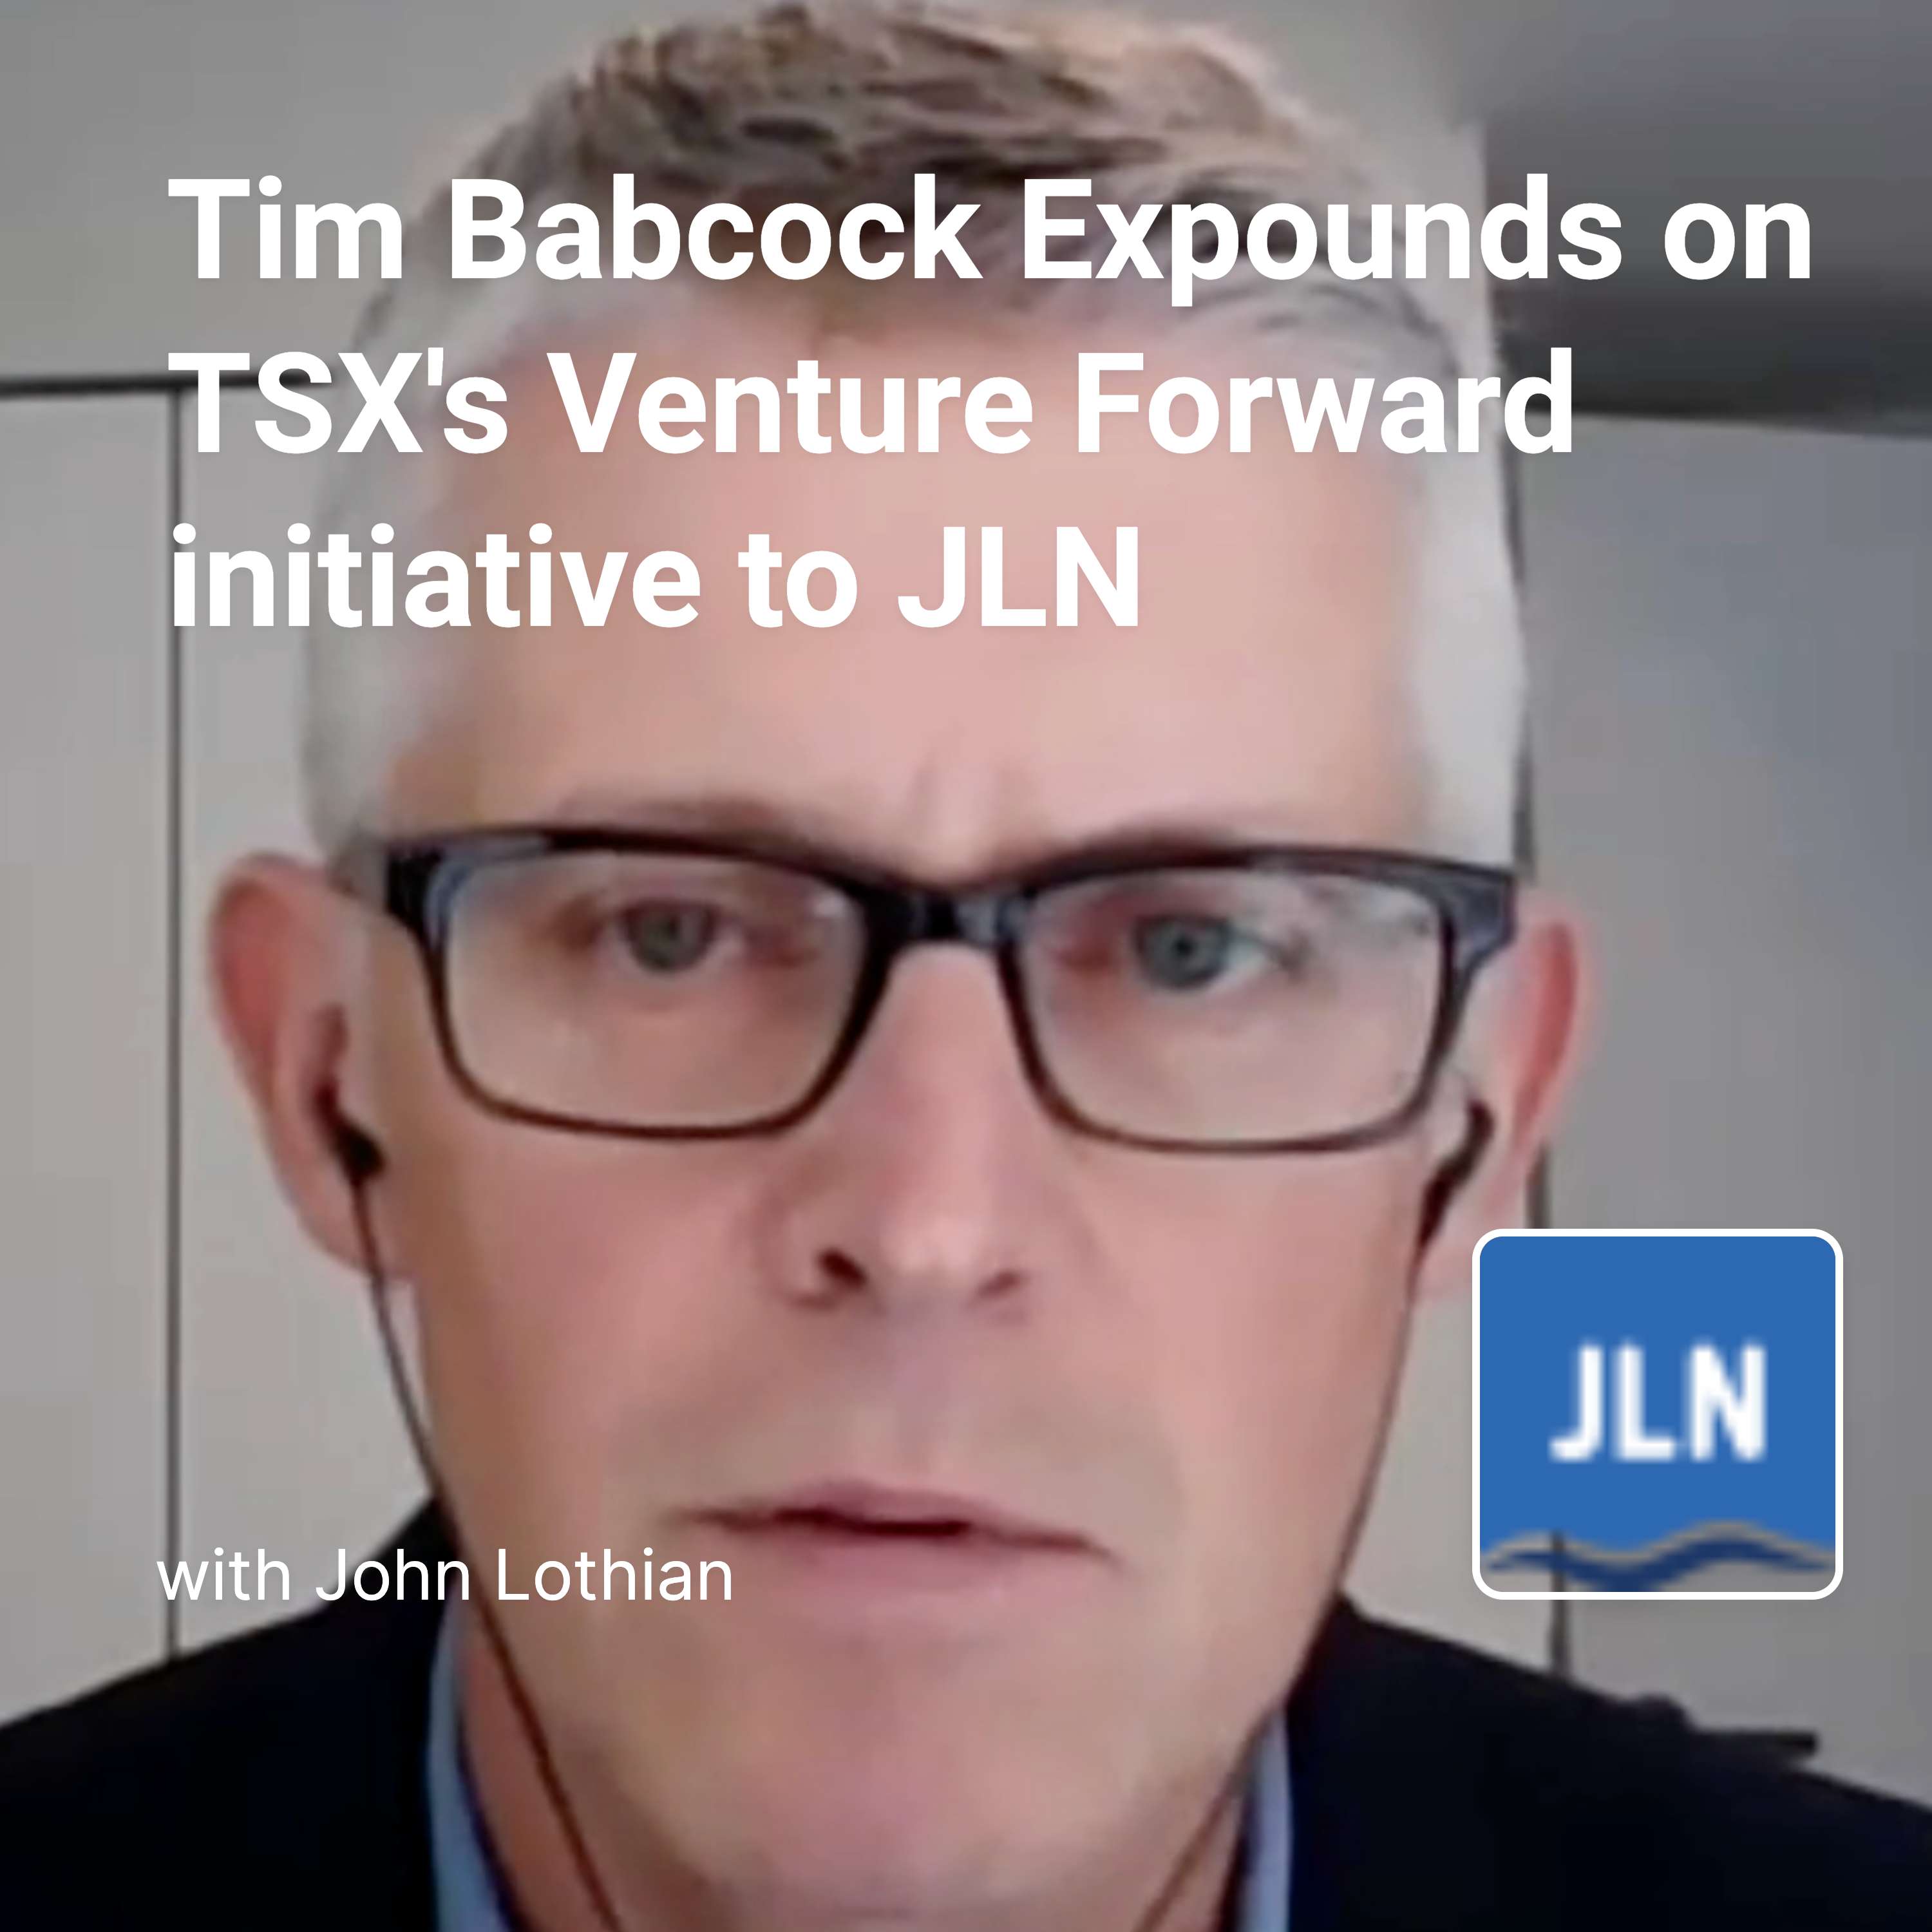 TSX Venture Exchange Head Tim Babcock Expounds on TSX's Venture Forward initiative to JLN